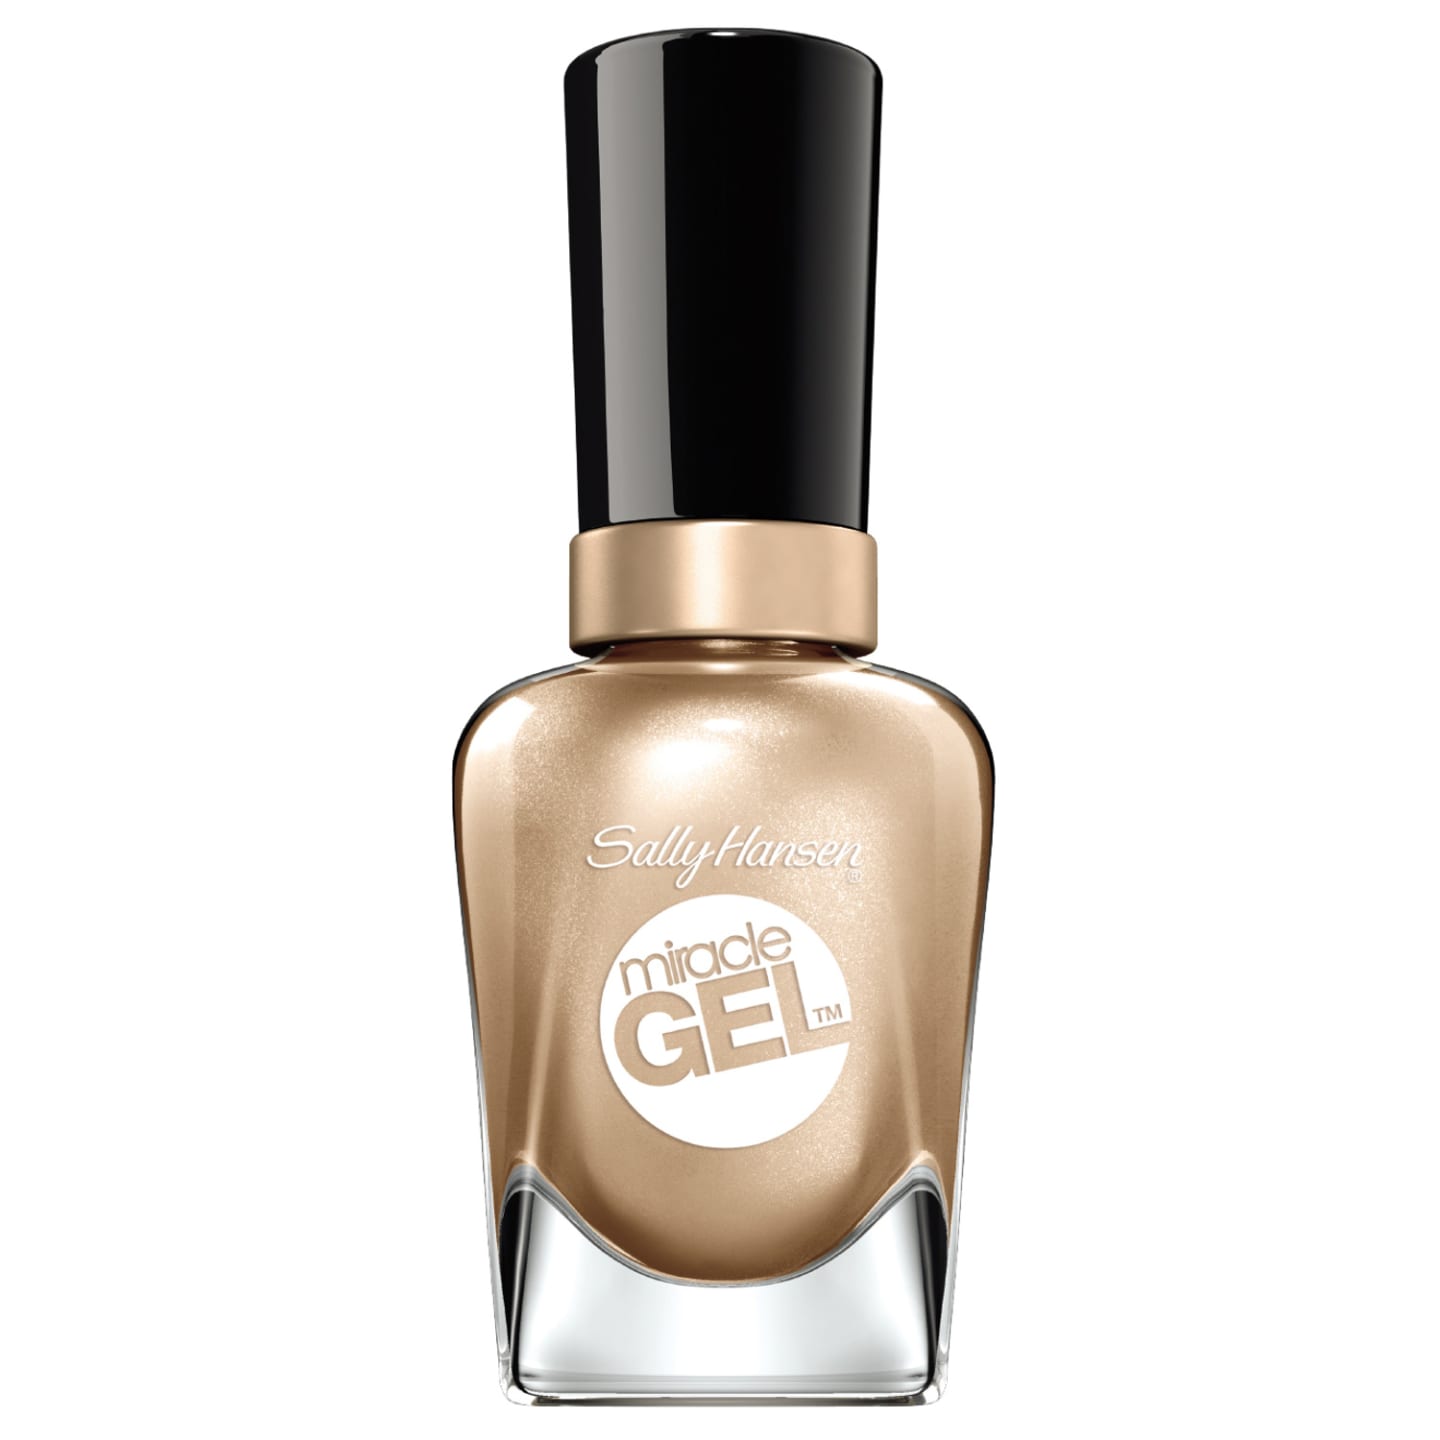 11 Best Chrome Nail Polishes That’ll Give Your Nails A Runway Glow!